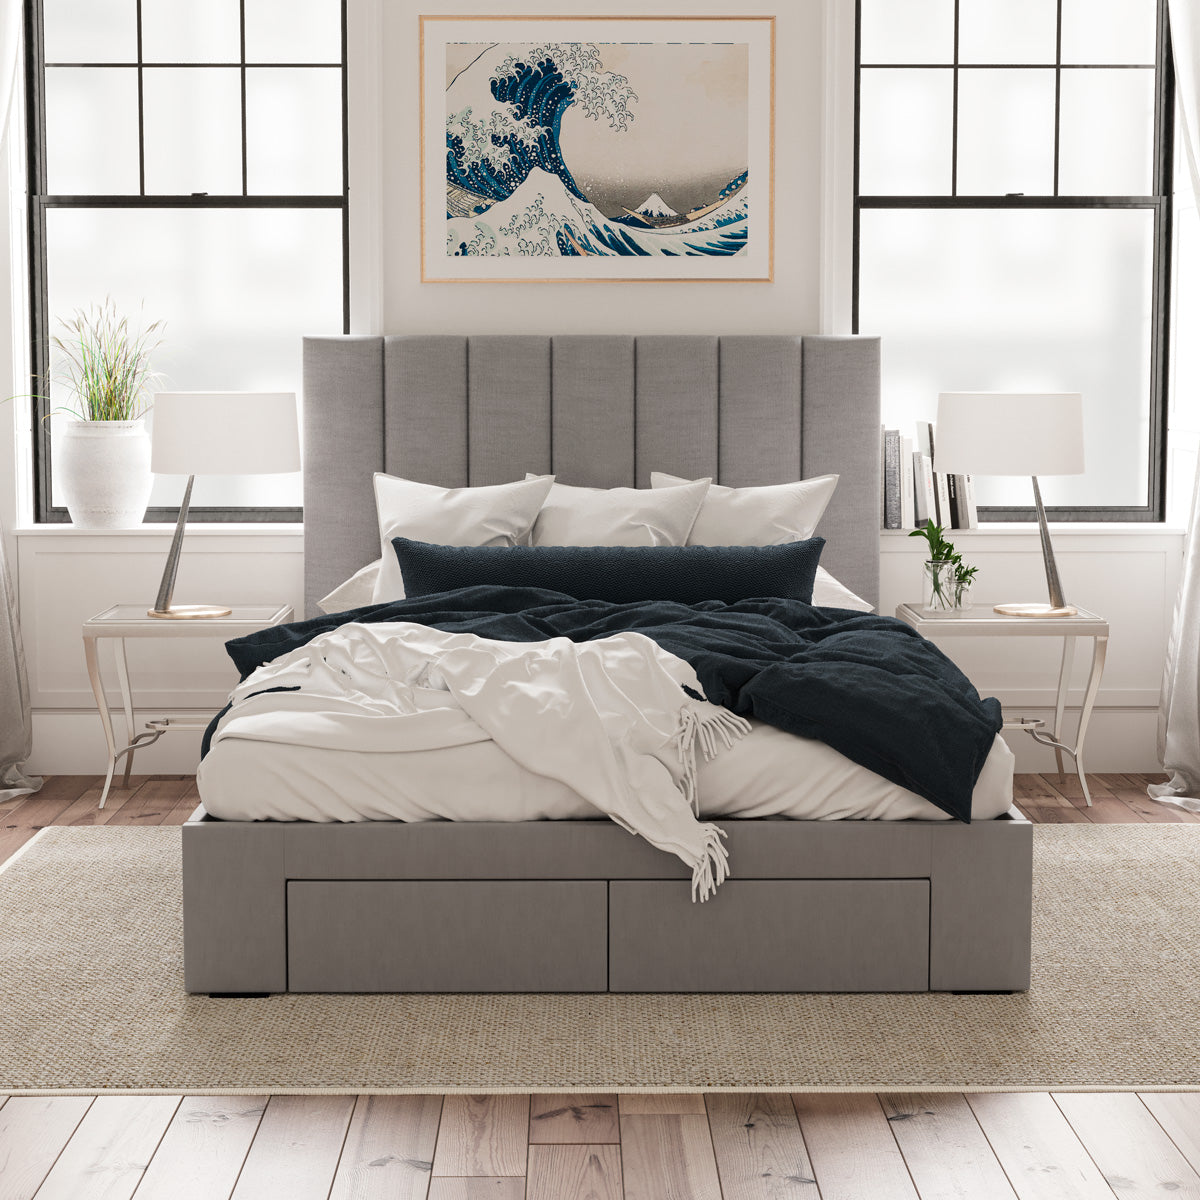 Celine Bed Frame with Four Storage Drawers (Grey Fabric)